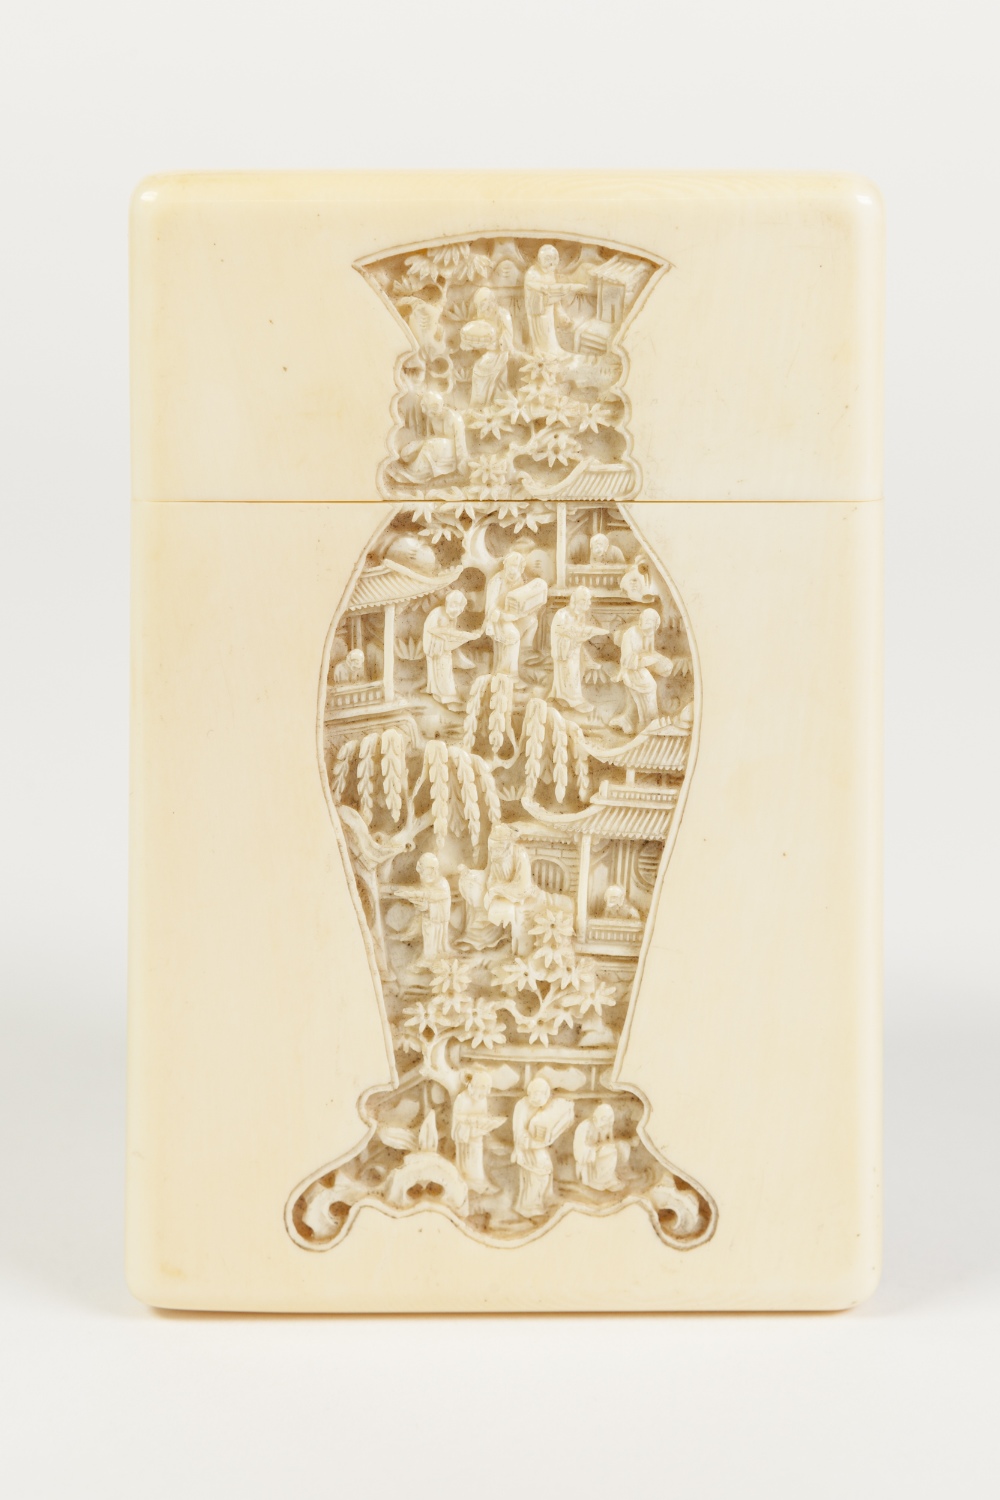 A CHINESE LATE QING DYNASTY CANTON CARVED IVORY VISITING CARD CASE, plain with a vase shape